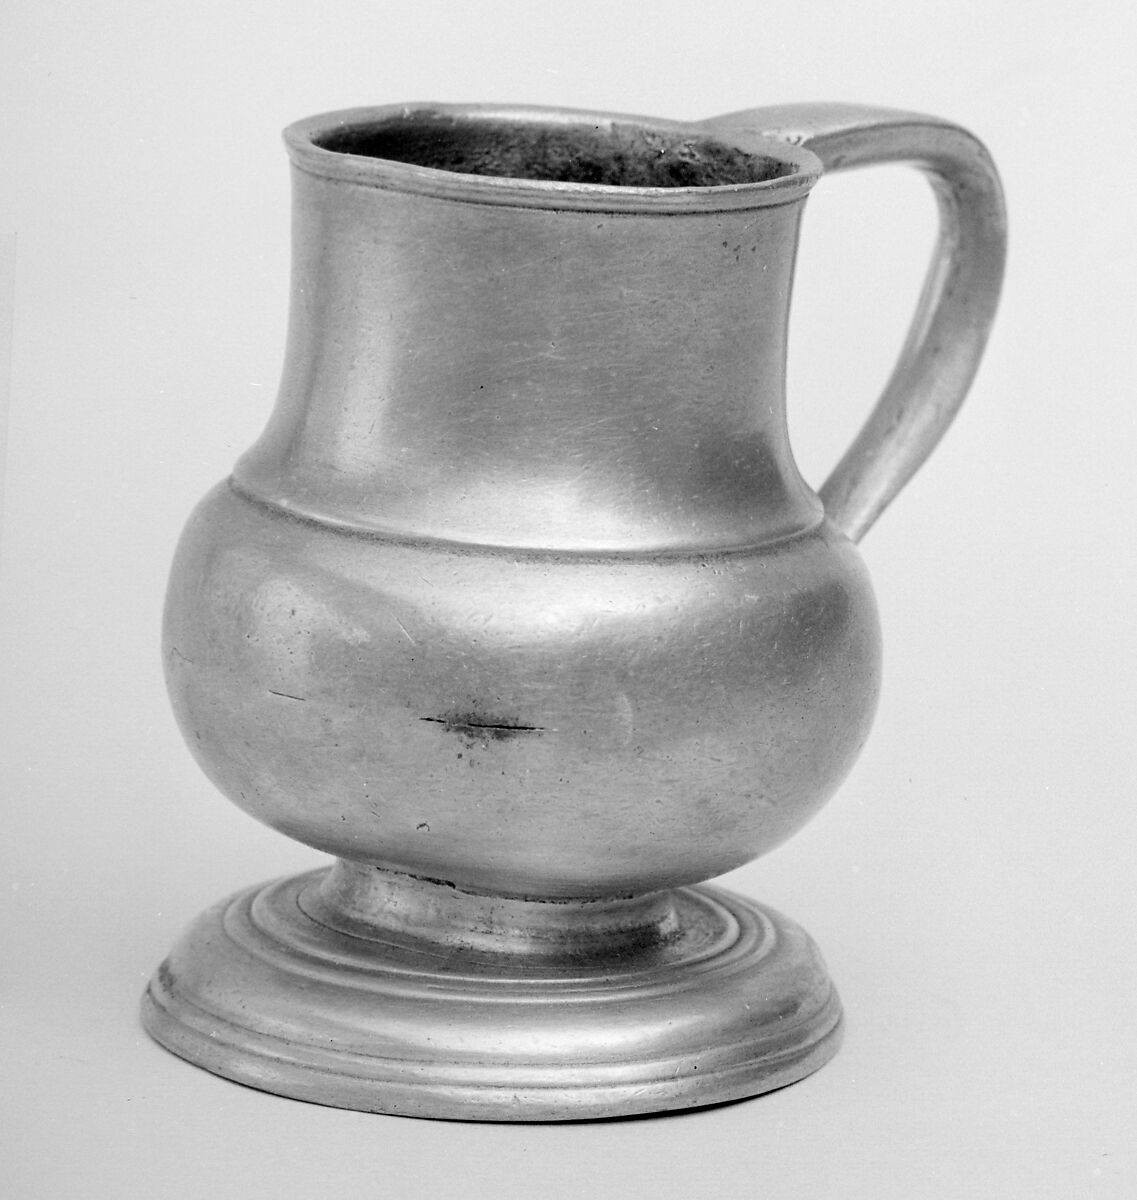 Jug, Pewter, possibly French 